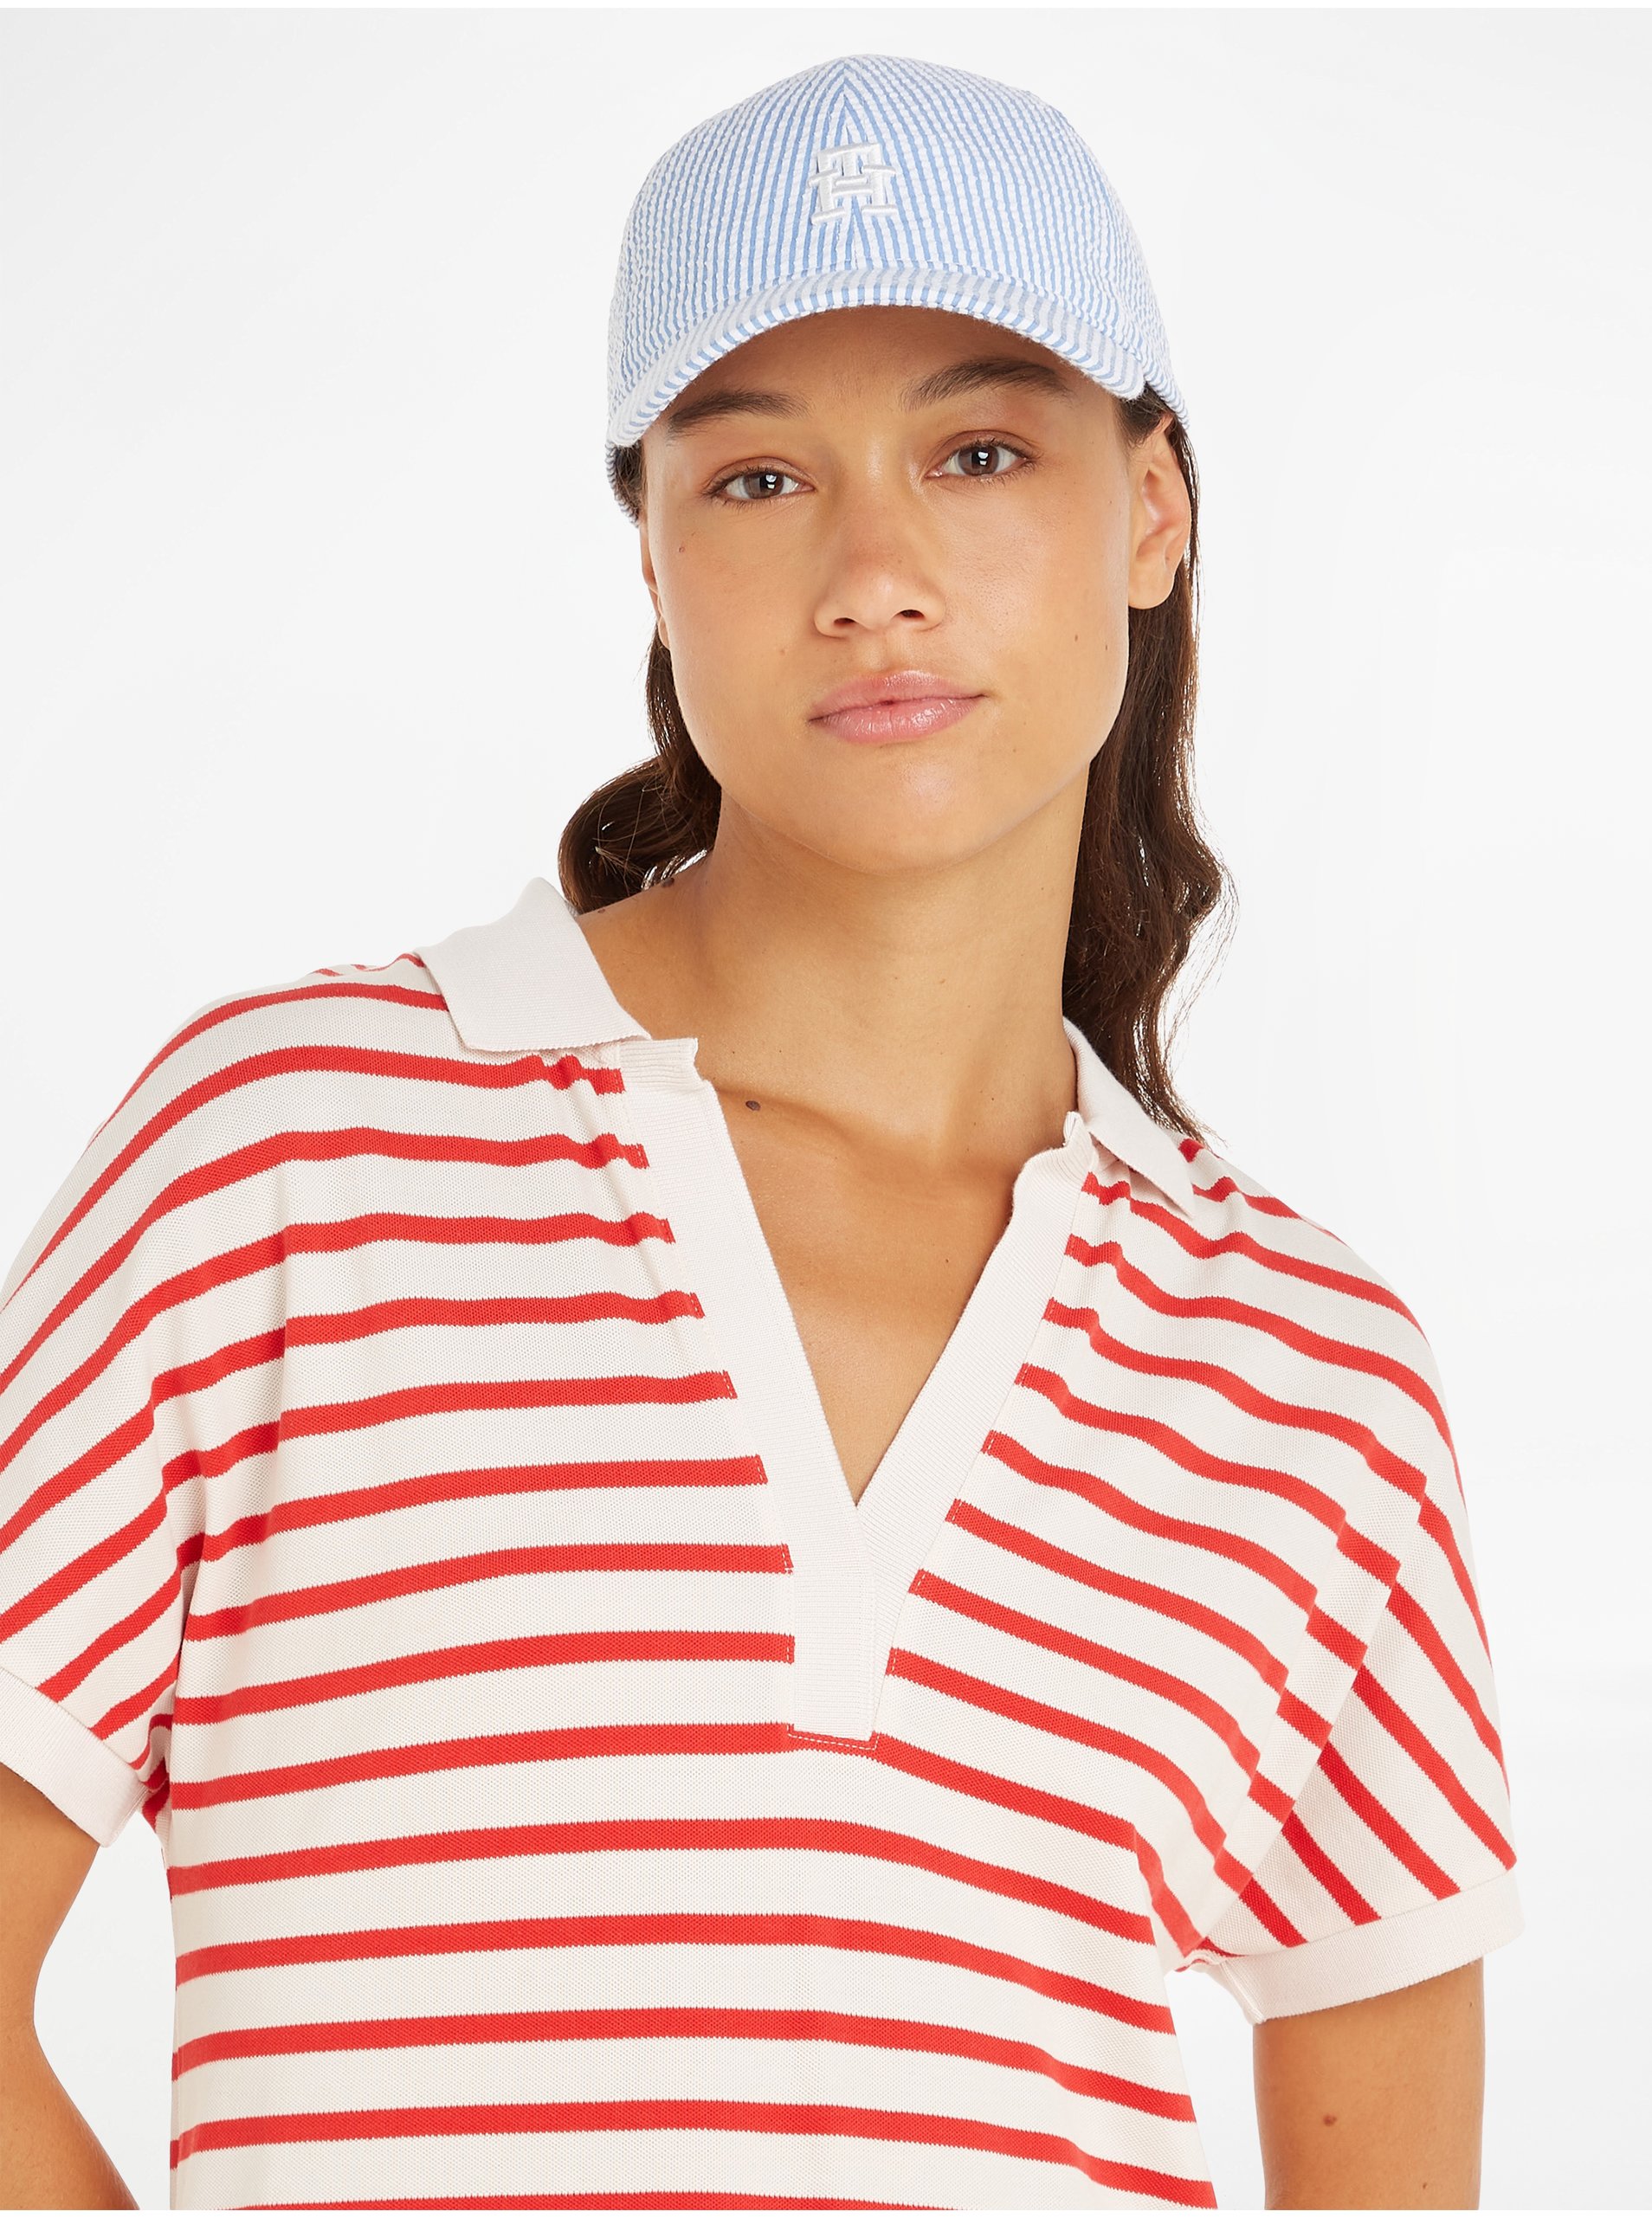 Blue and White Ladies Striped Cap Tommy Hilfiger Iconic Prep - Women